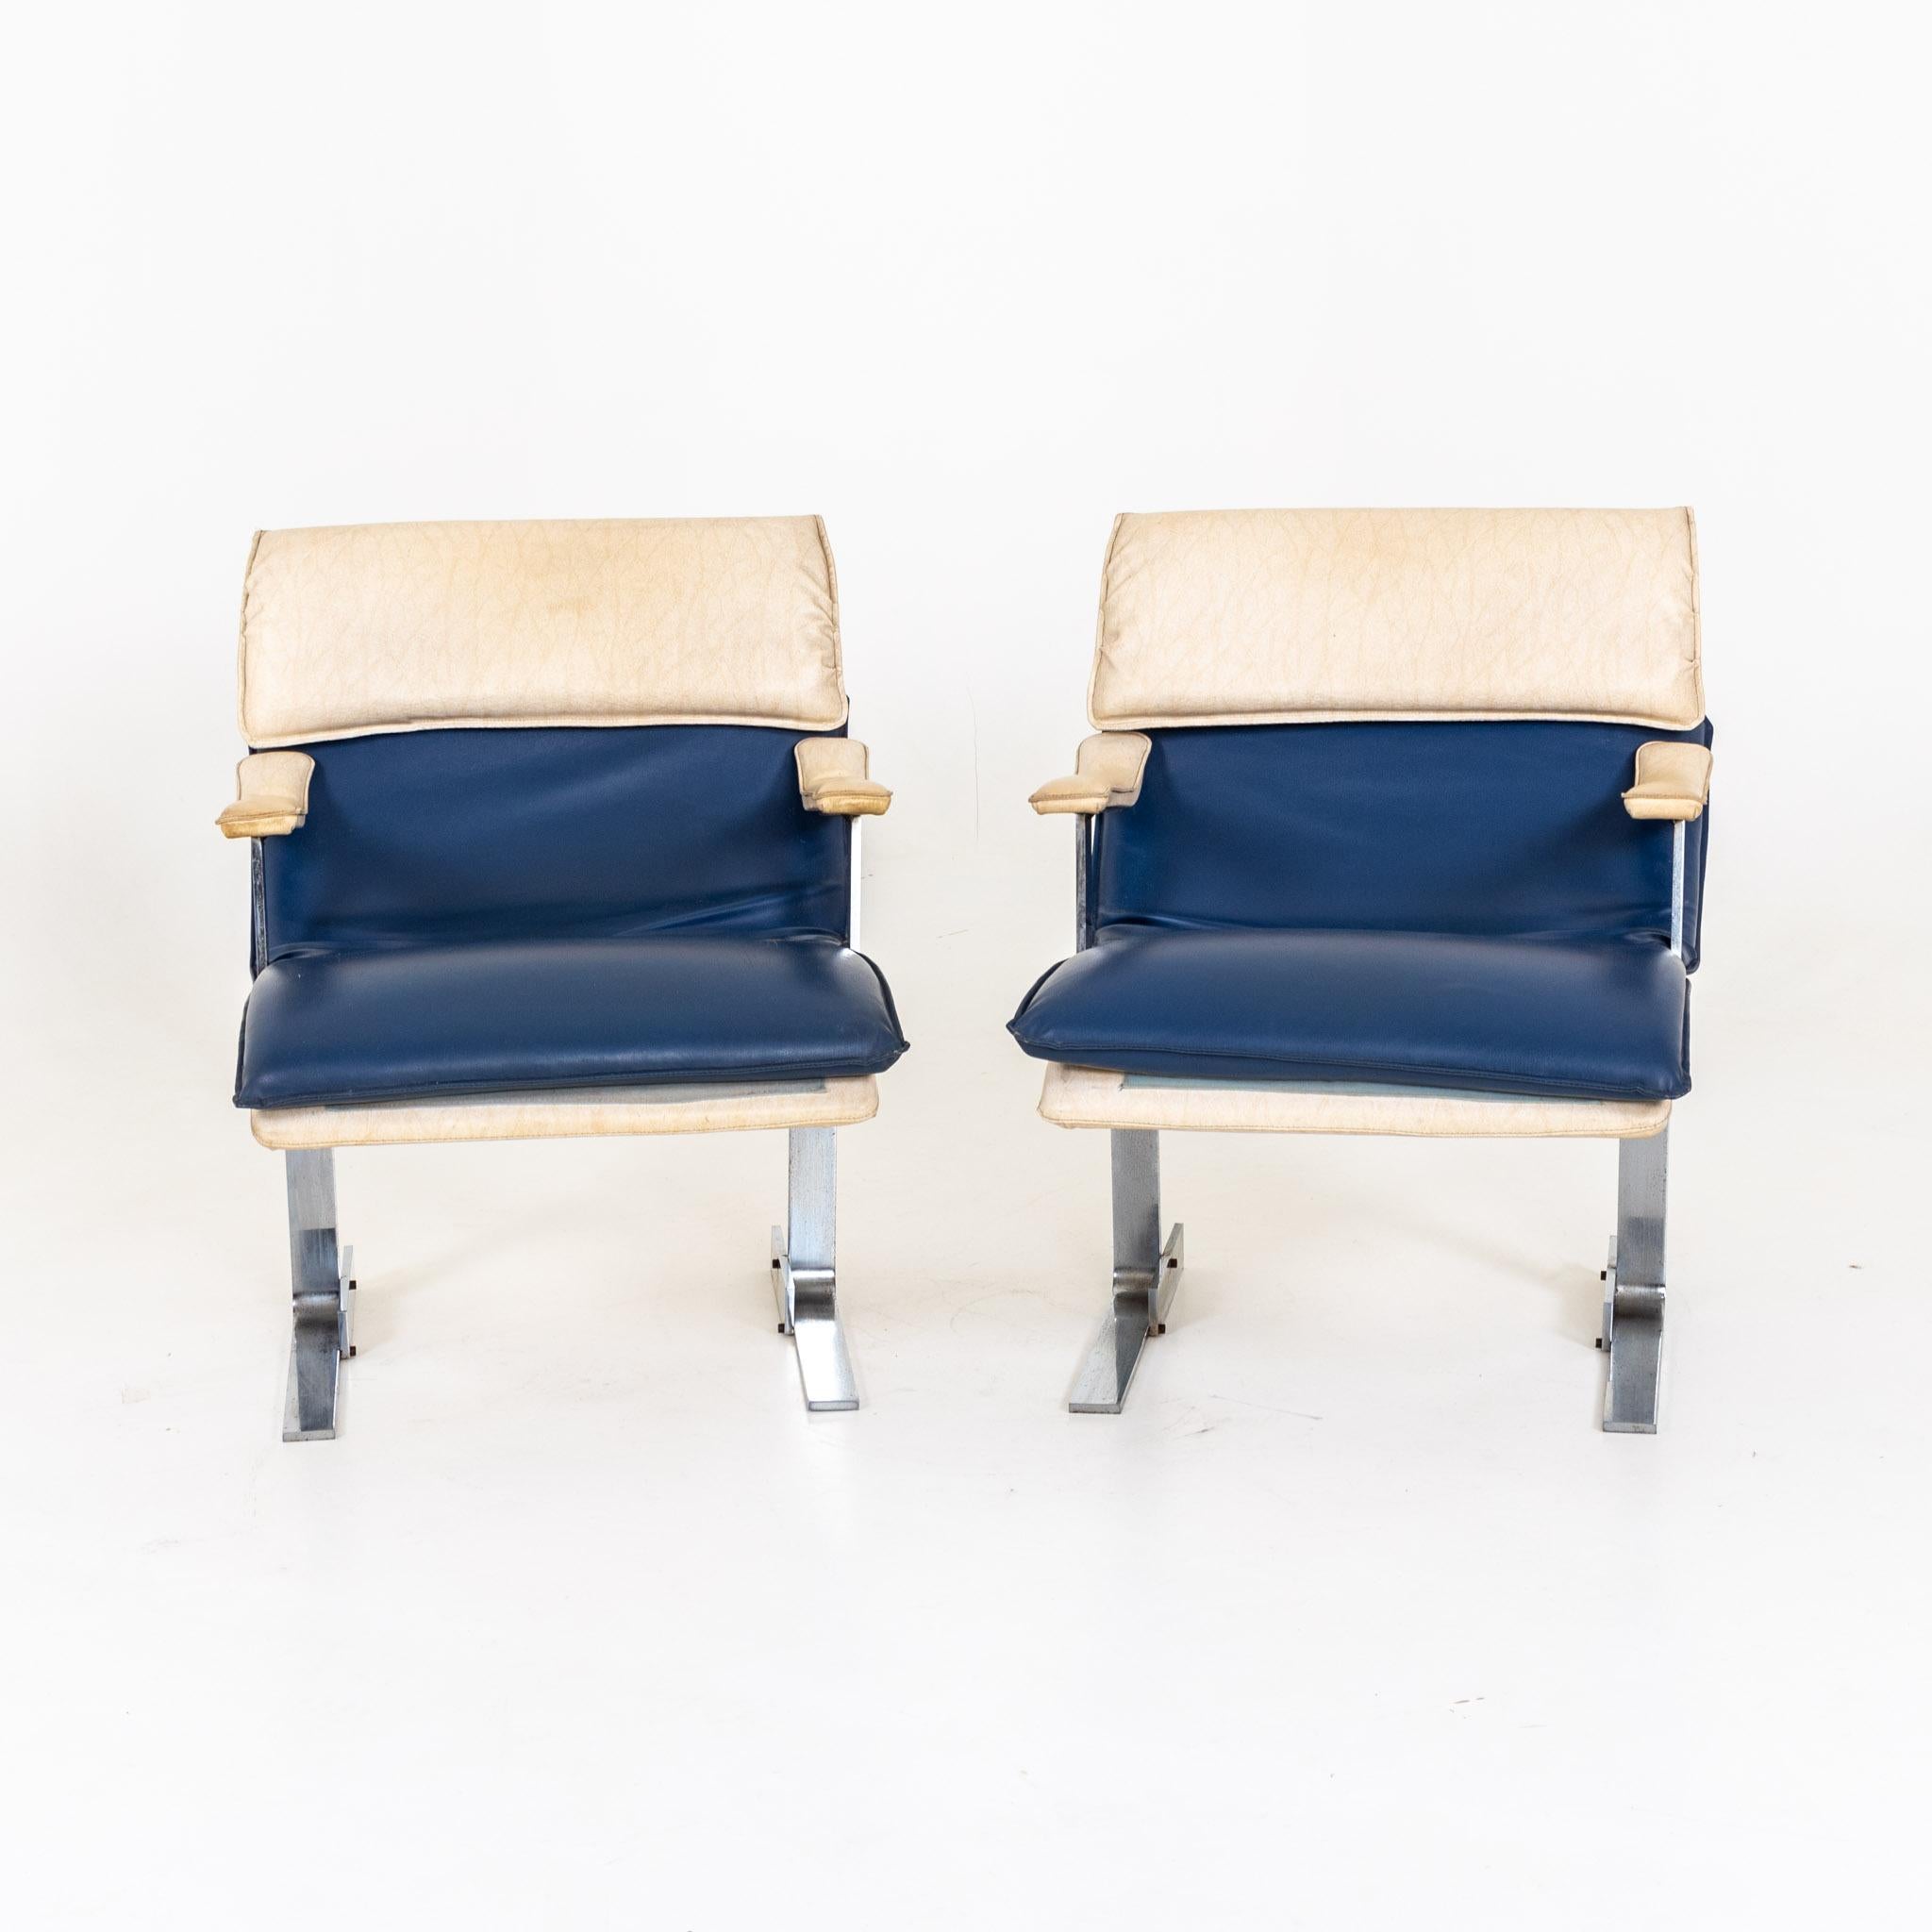 Armchairs with leather upholstery in blue and beige on metal frame. Signs of age and use.